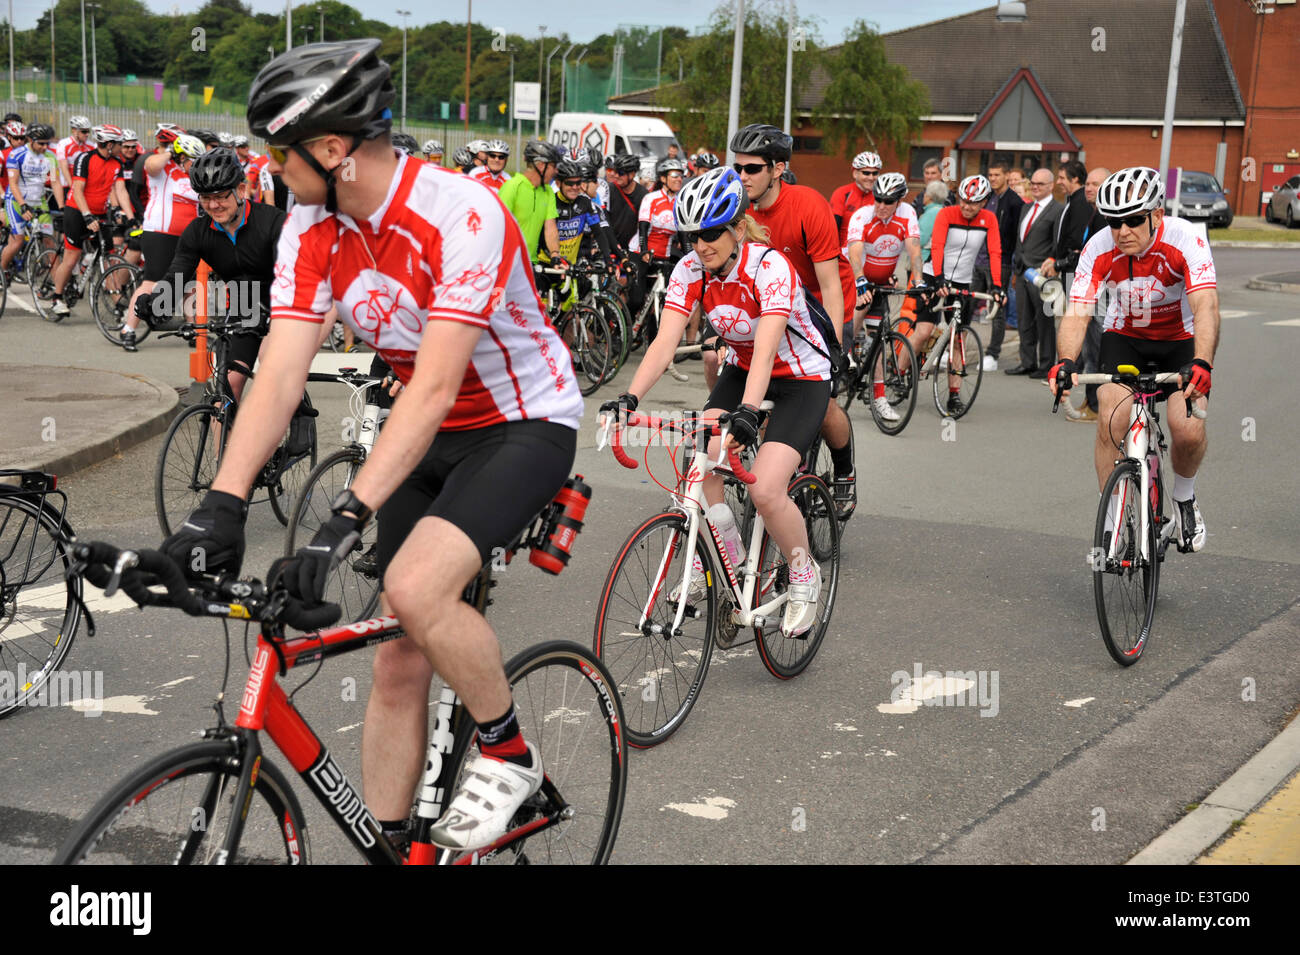 Ride For The 96 - Annual charity bike ride in memory of those who died at Hillsborough Stadium disaster in 1989 Stock Photo